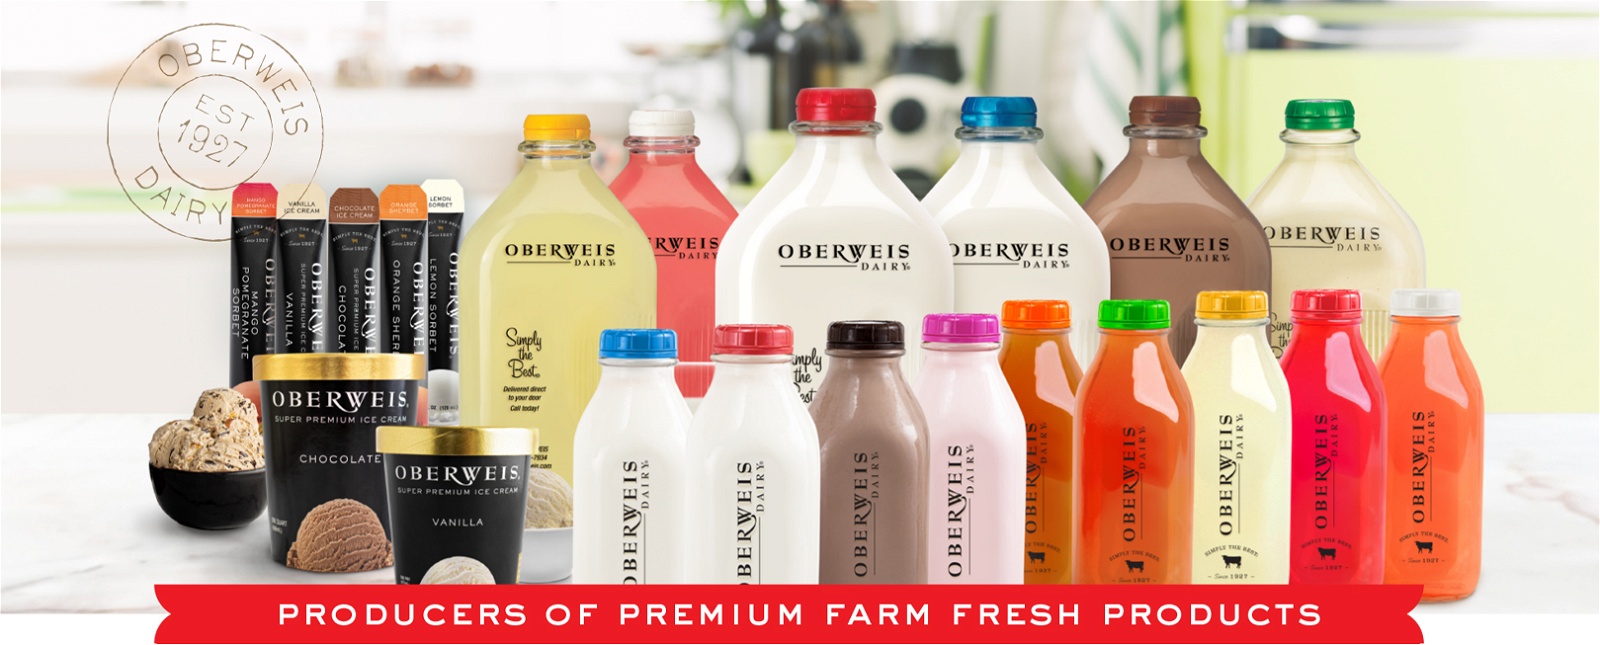 Oberweis Dairy - About Our Products